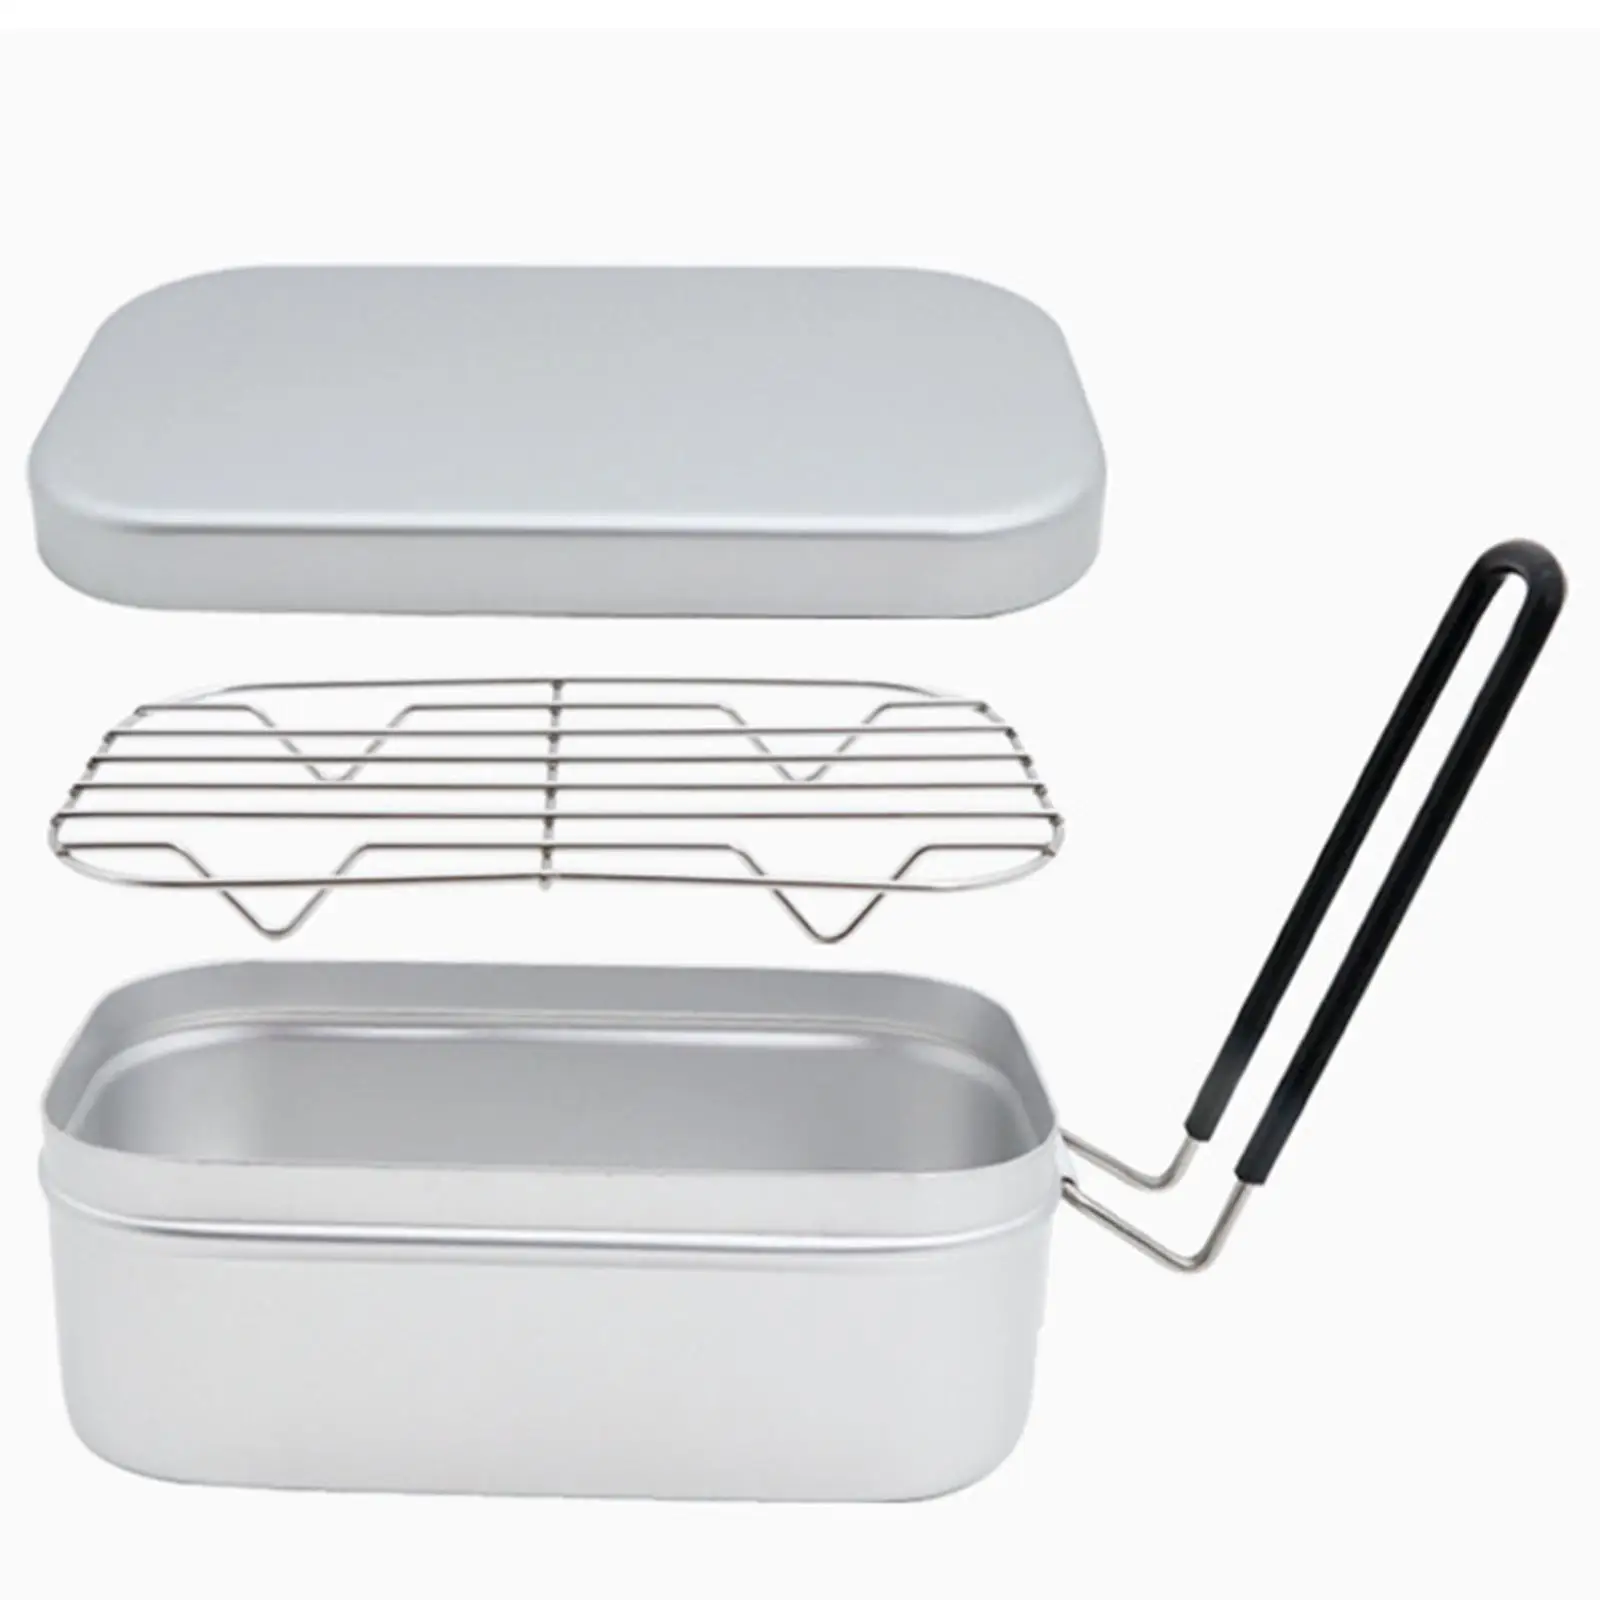 Mini Lunch Box Steaming Rack Cooking Rack for Cooking Mountaineering Outdoor Picnic Fishing